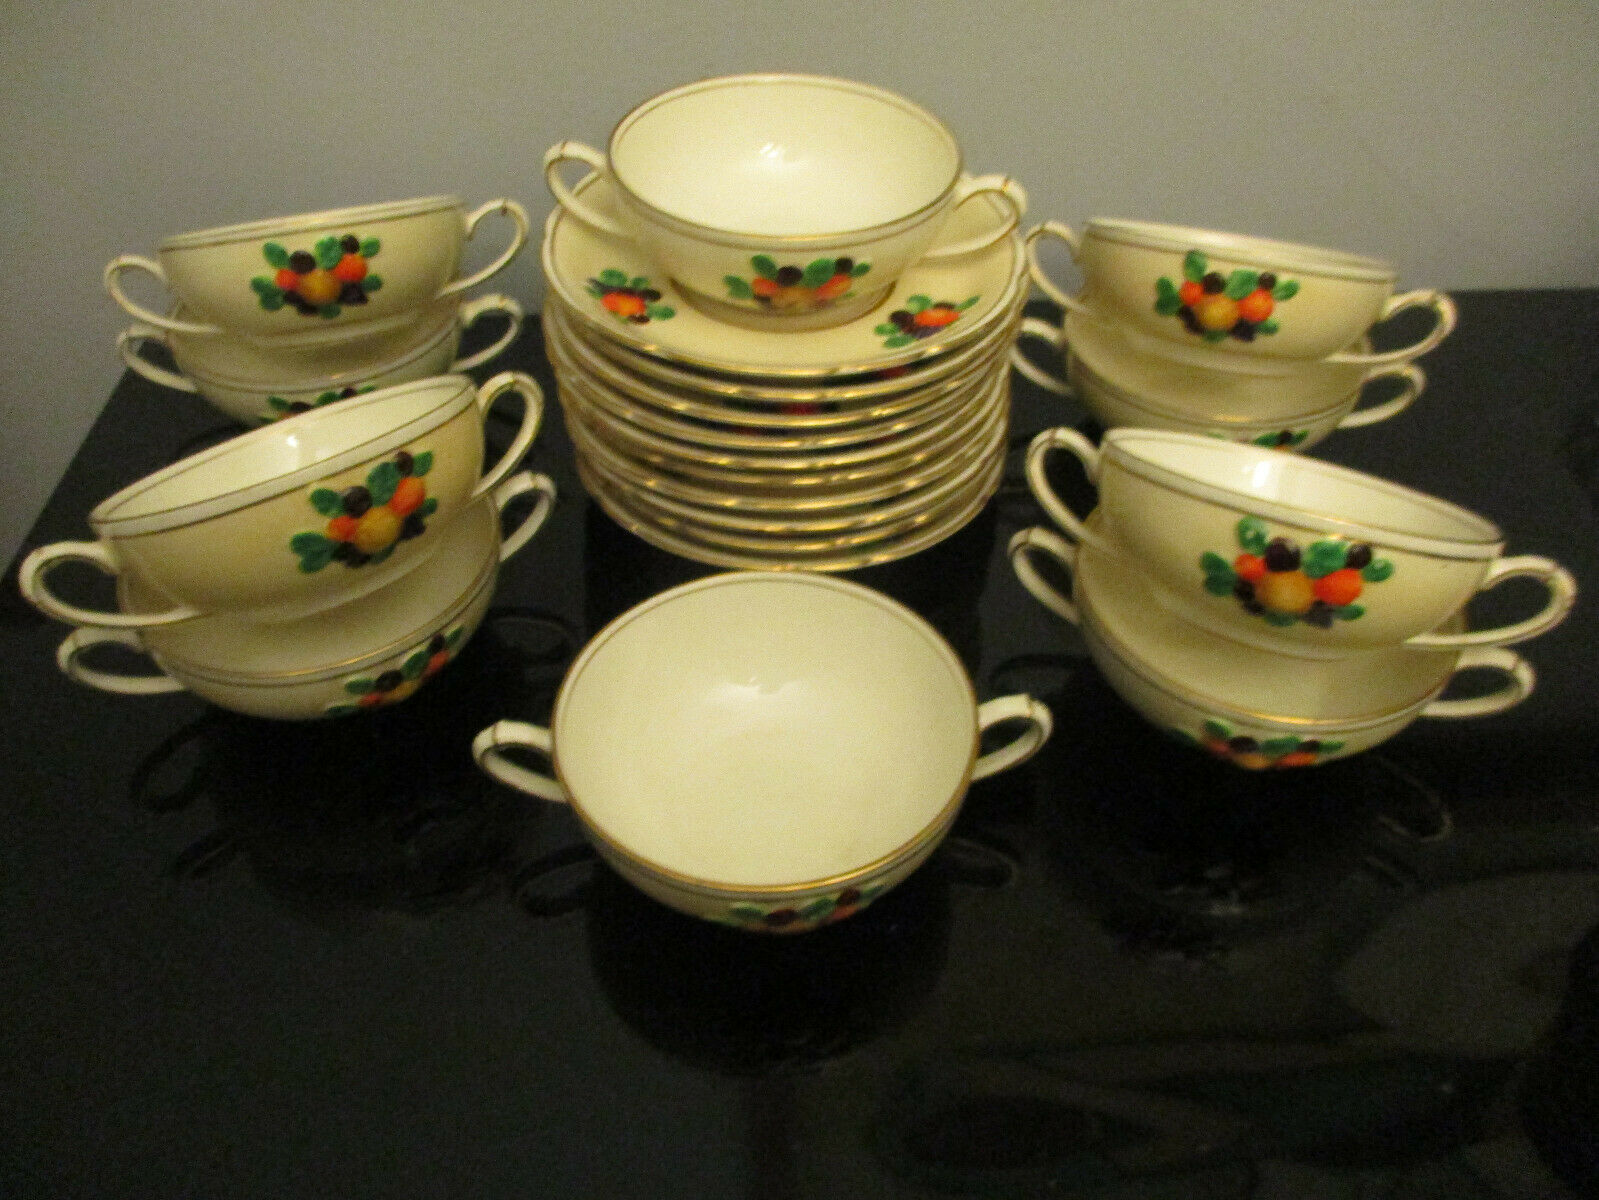 10 Antique Booths China Della Robbia Harvest Embossed Fruit Cream Soup Bowls!